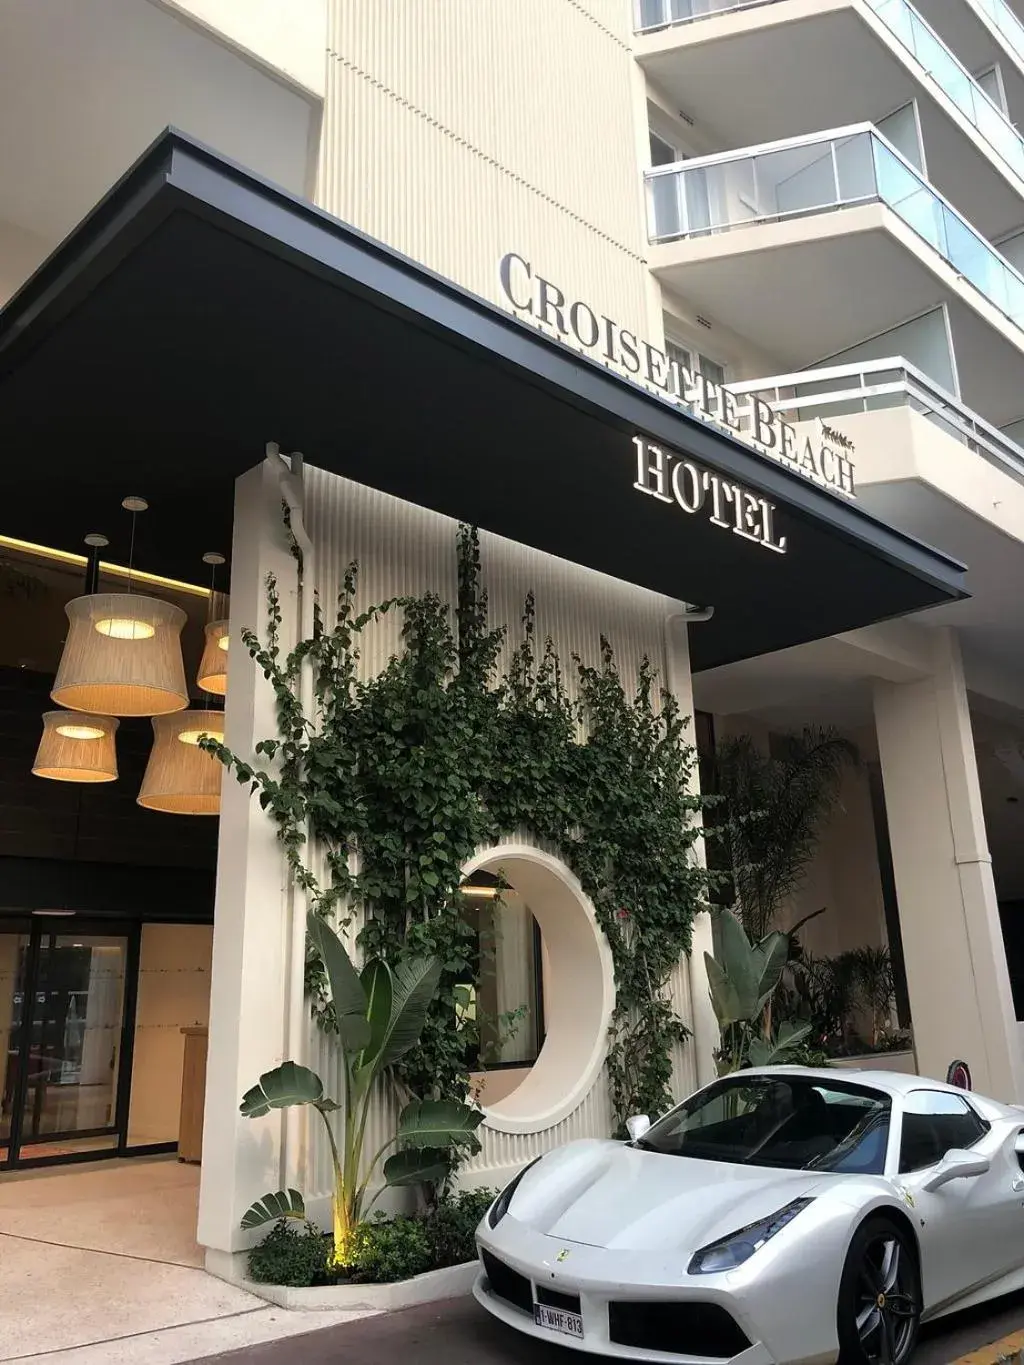 Property building in Hotel Croisette Beach Cannes Mgallery